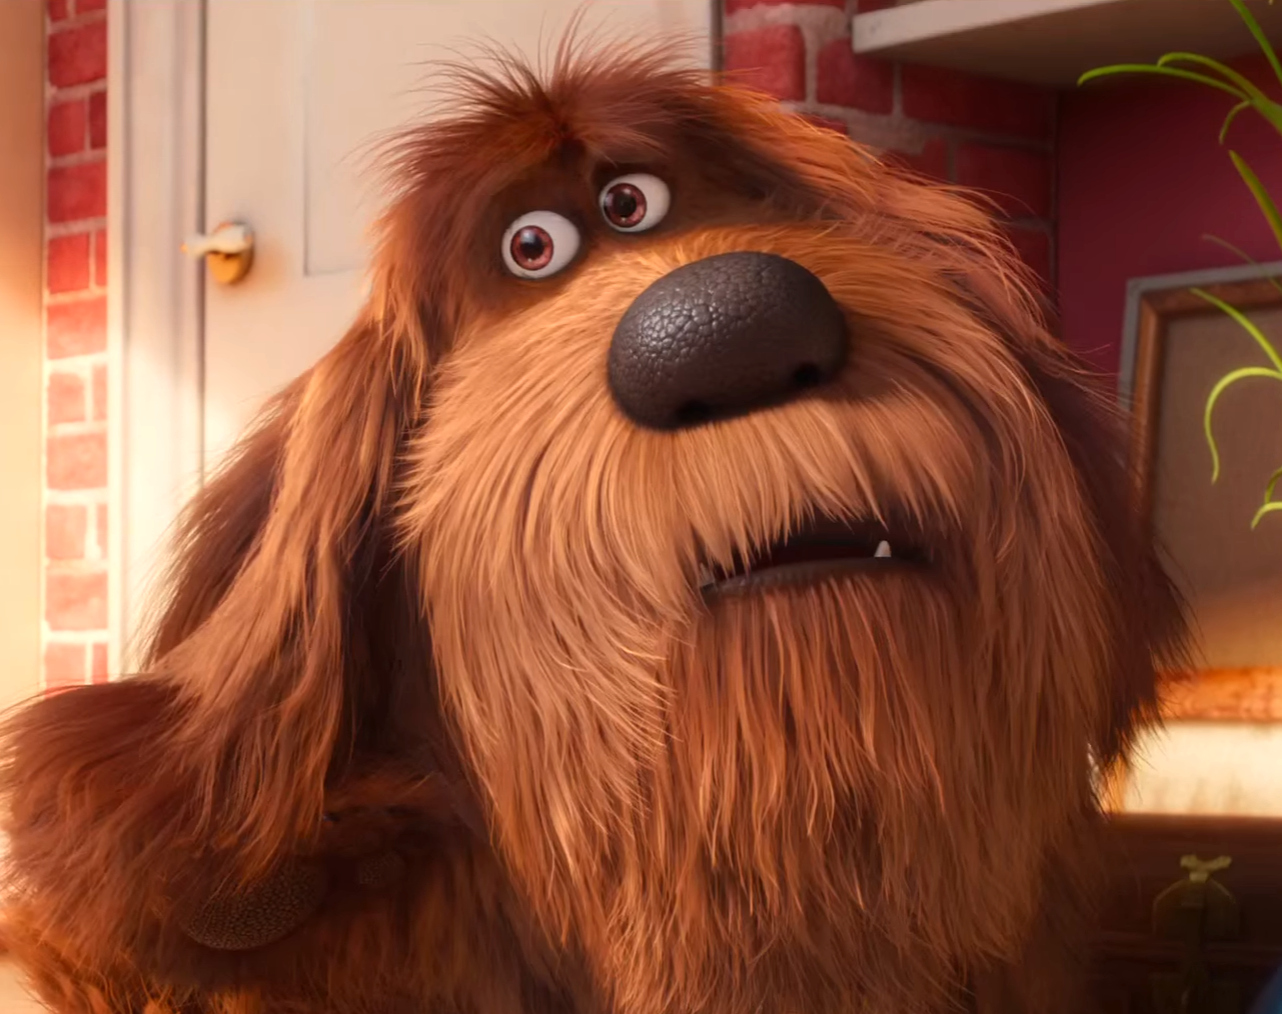 secret life of pets movie stream without registration